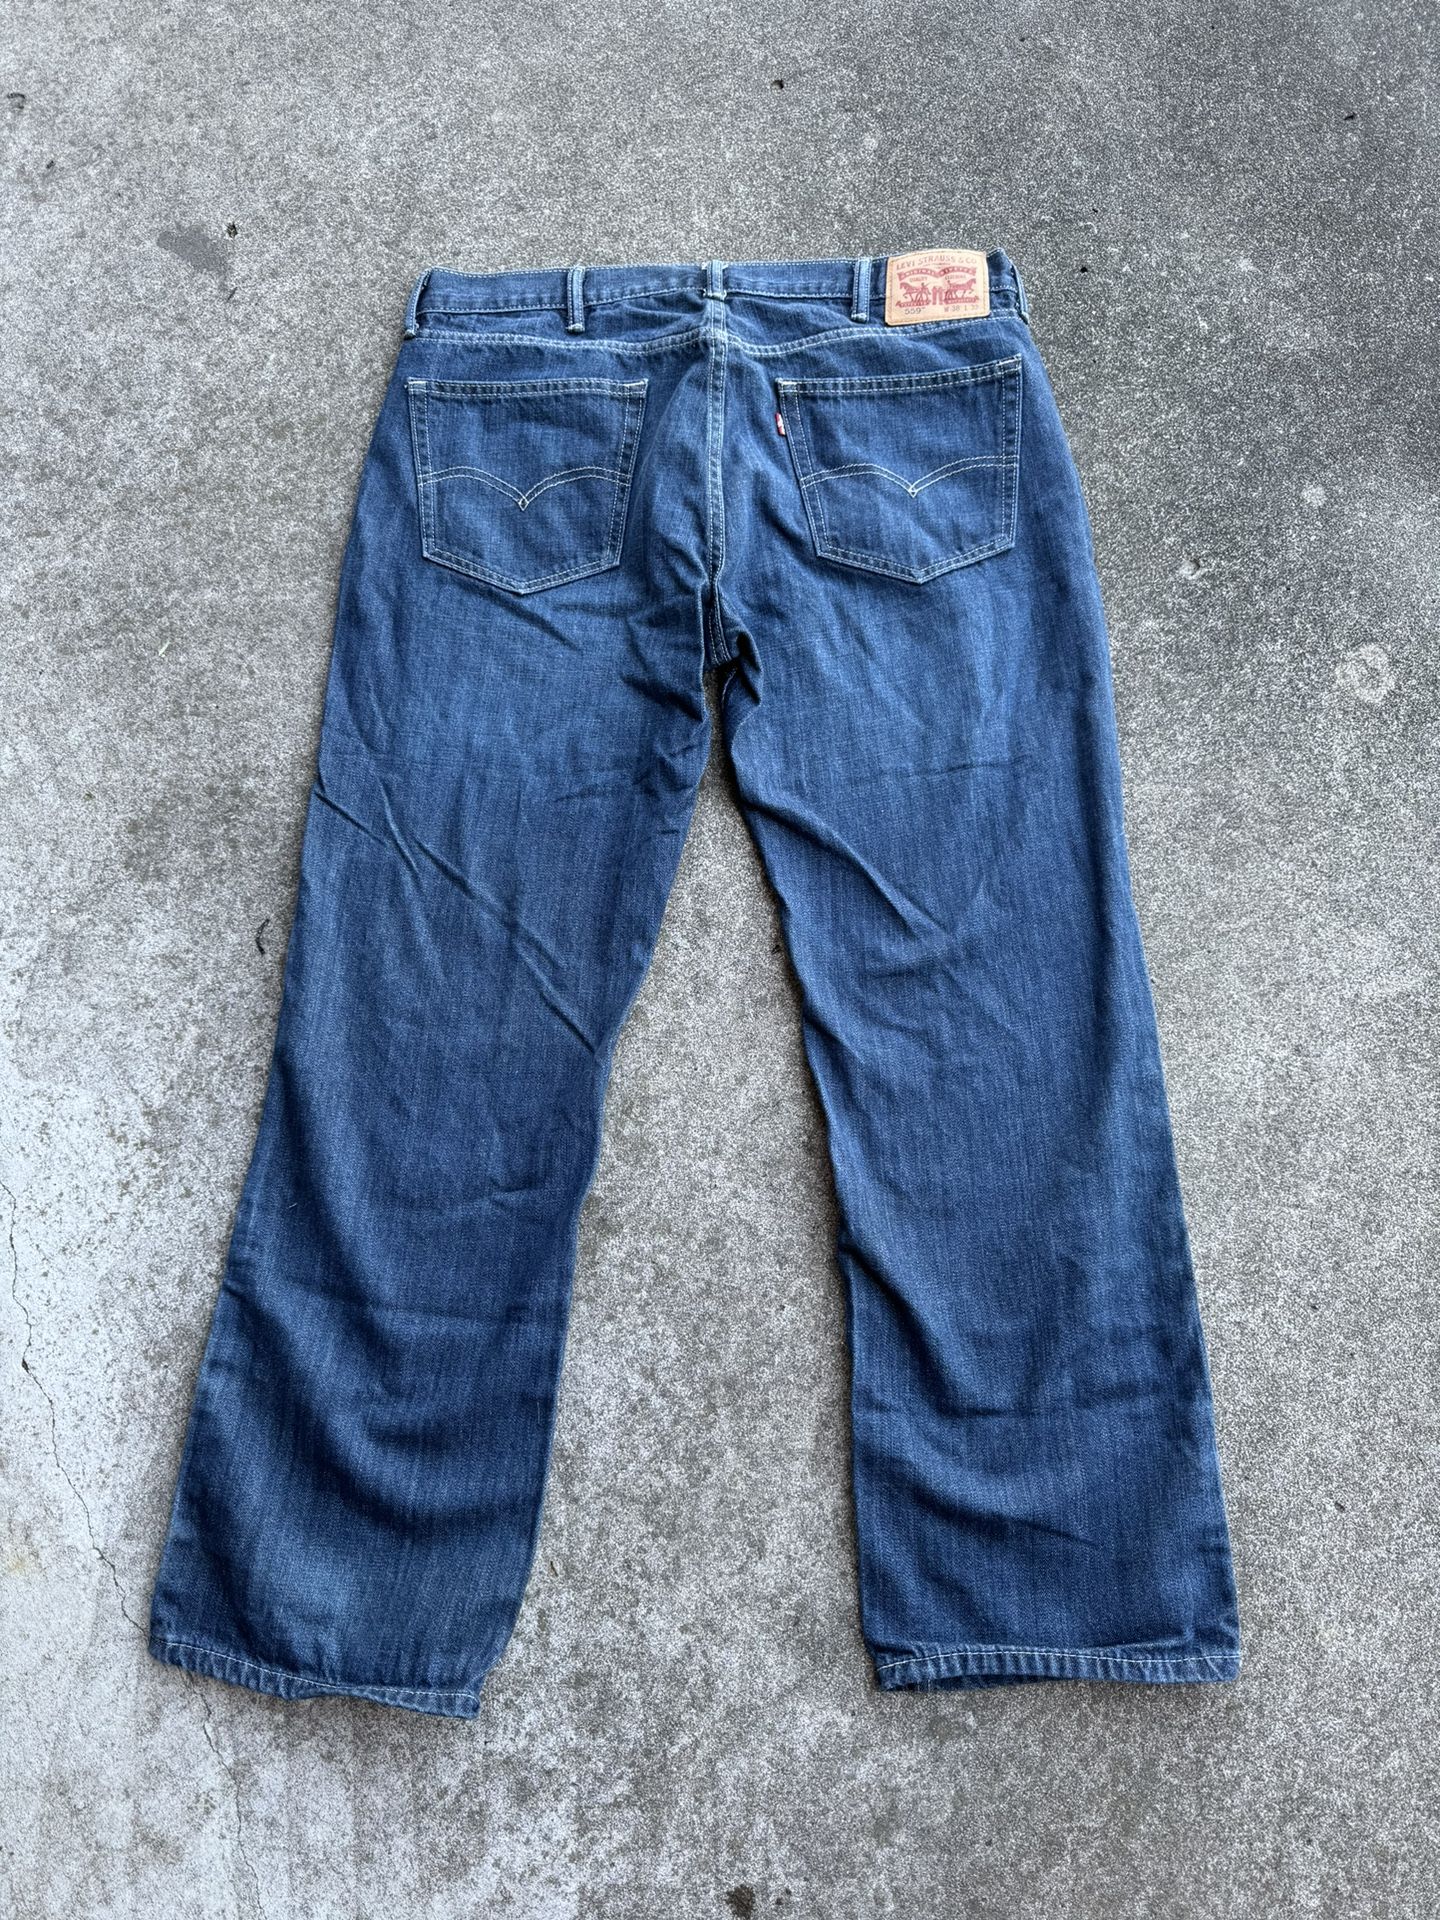 Men’s Levi’s 559 Jeans Shipping Avaialbe 